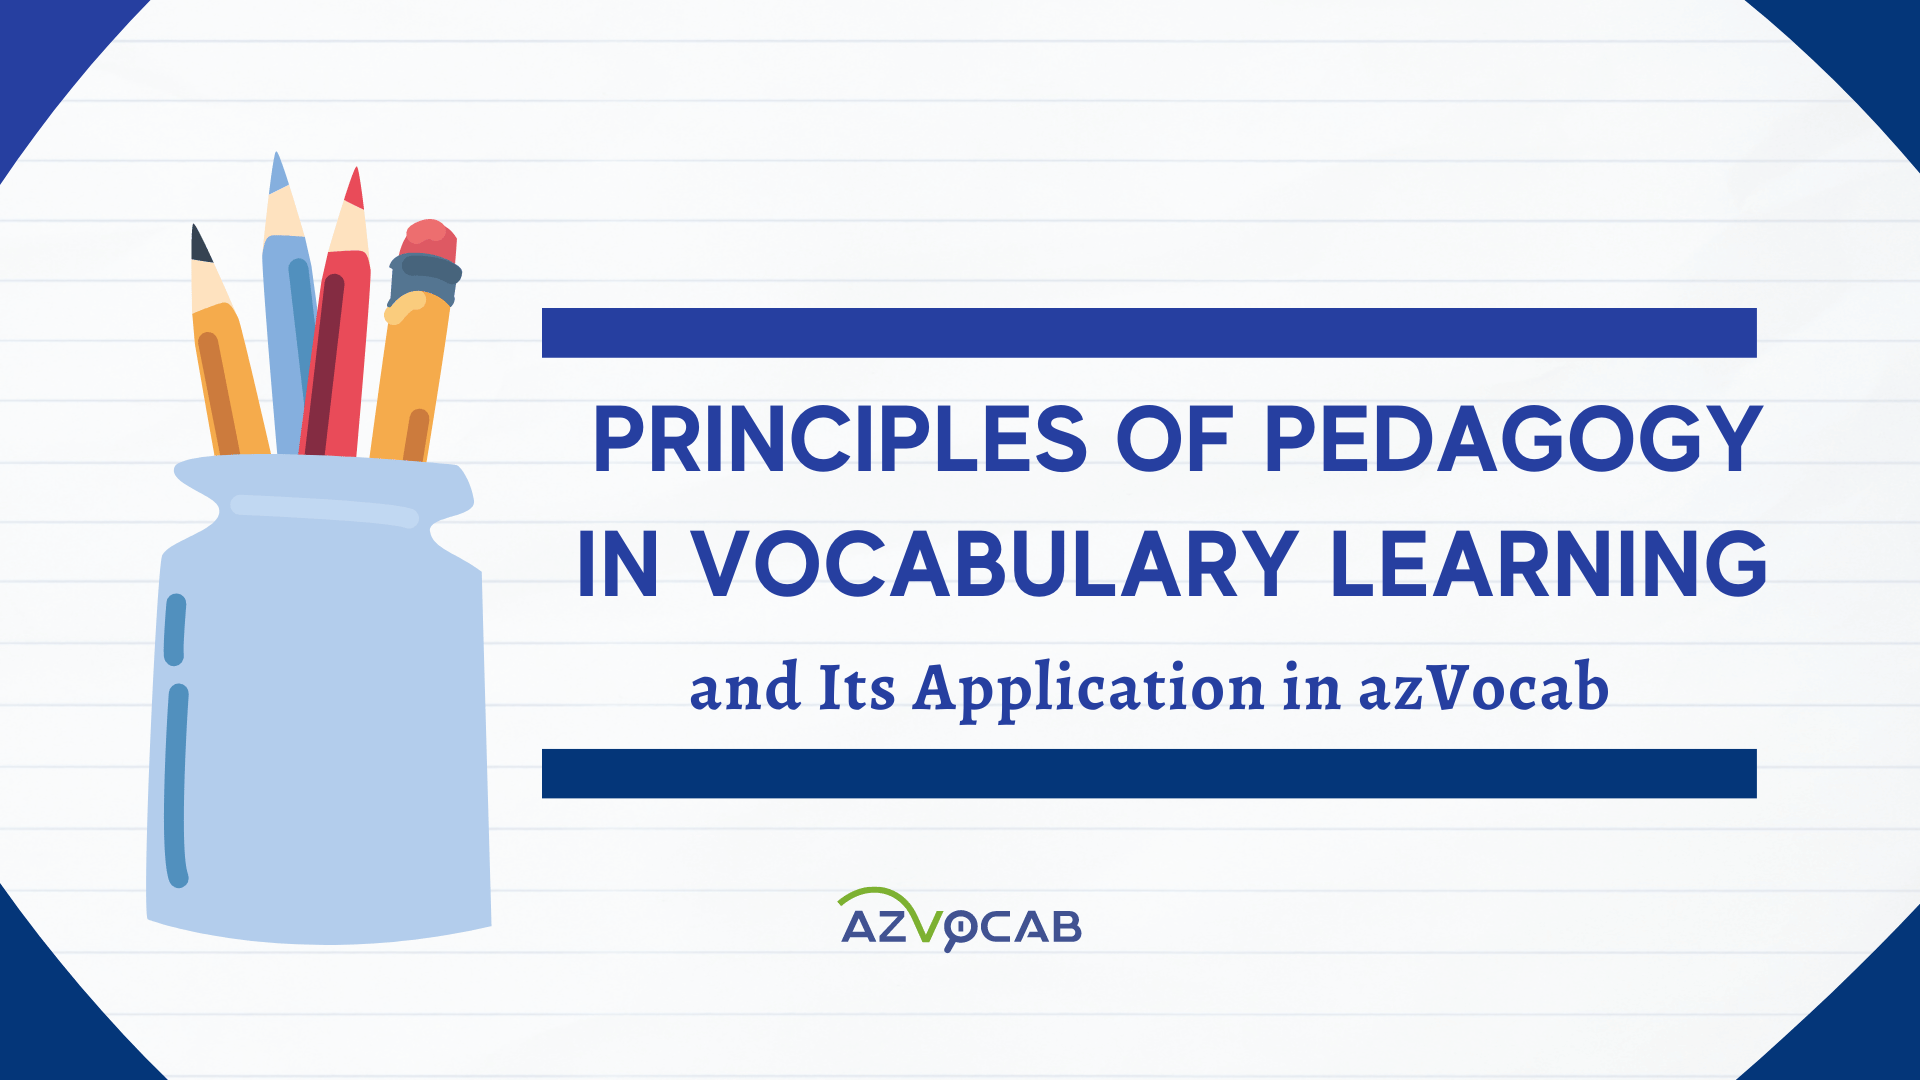 Principles of Pedagogy in Vocabulary learning and its application